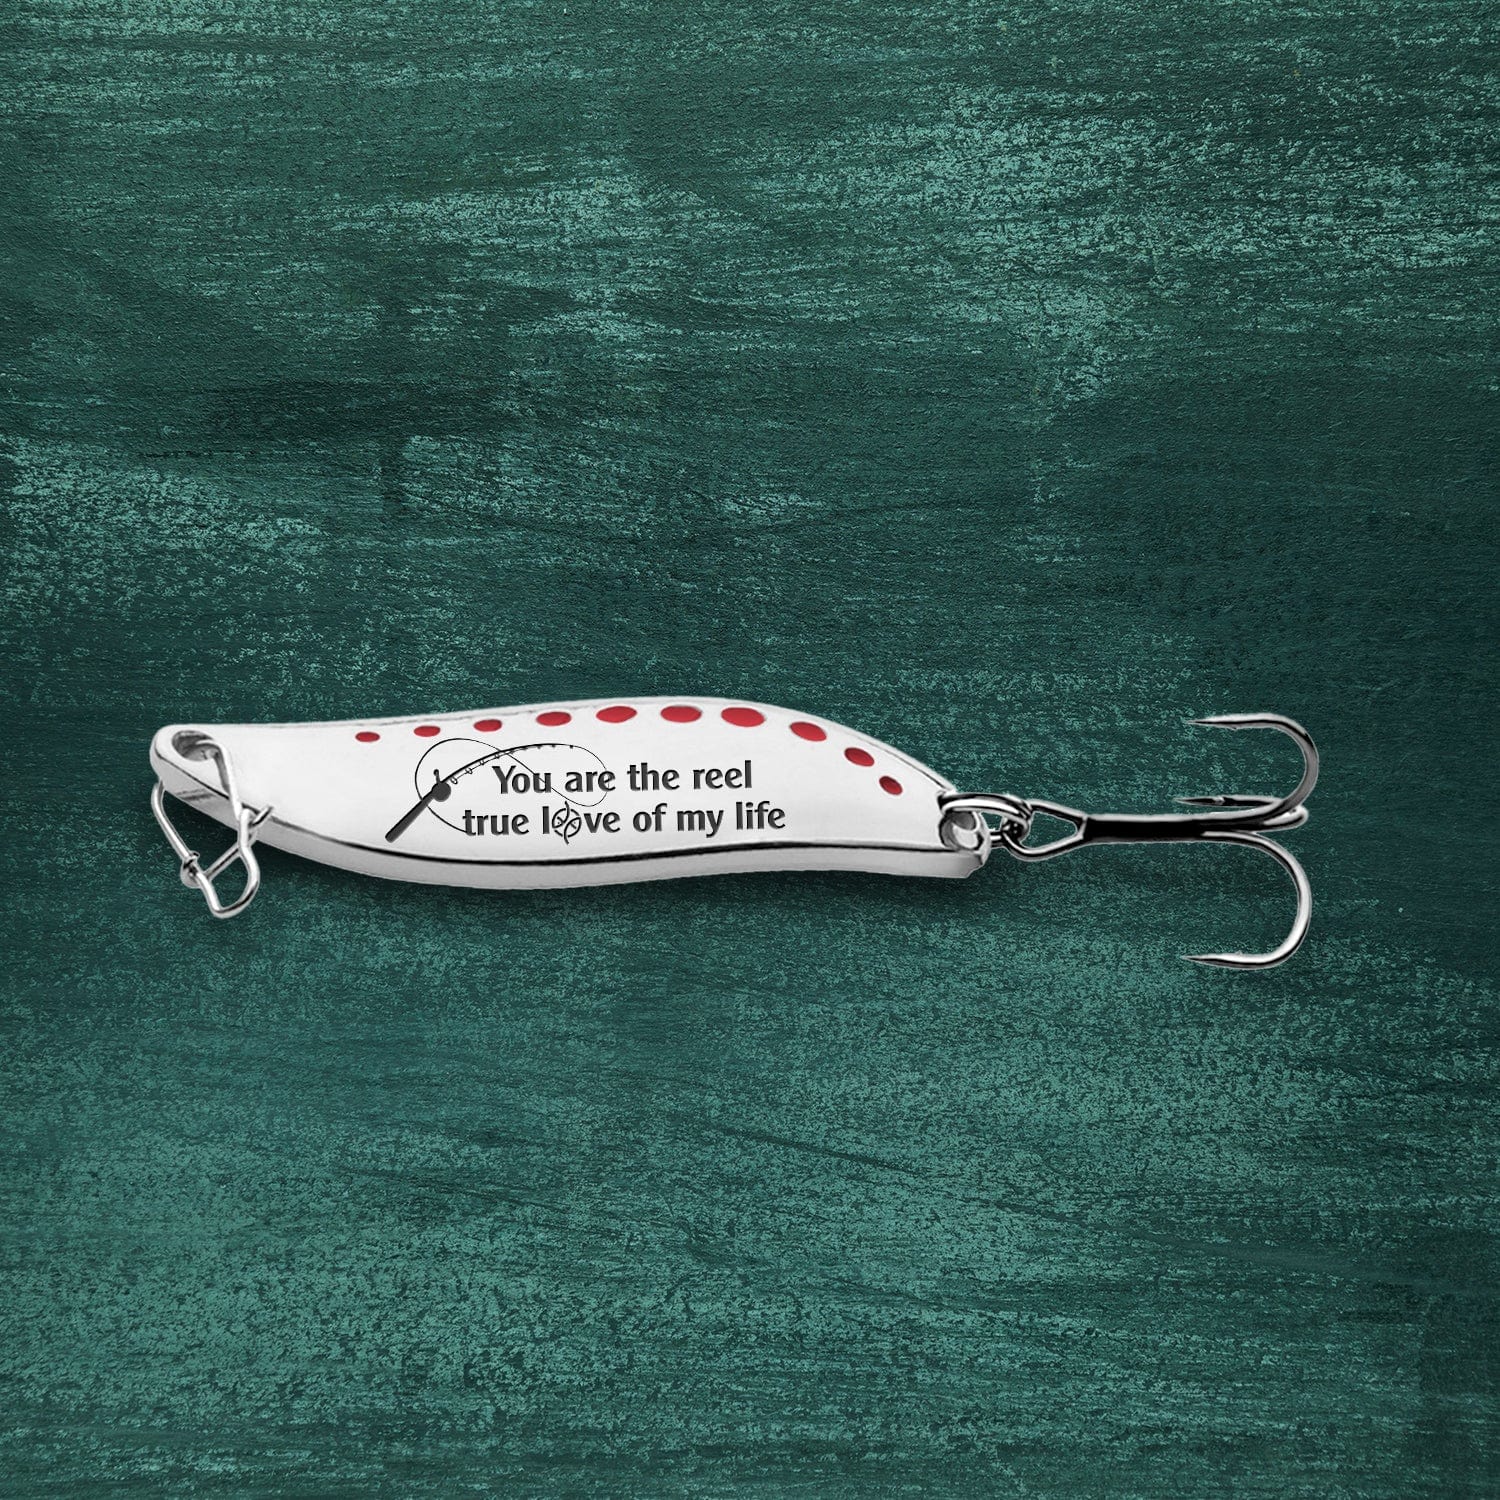 Fishing Lures - Fishing - To My Master Baiter - Love Is A Net That Catches  Hearts Like A Fish - Gfaa26006